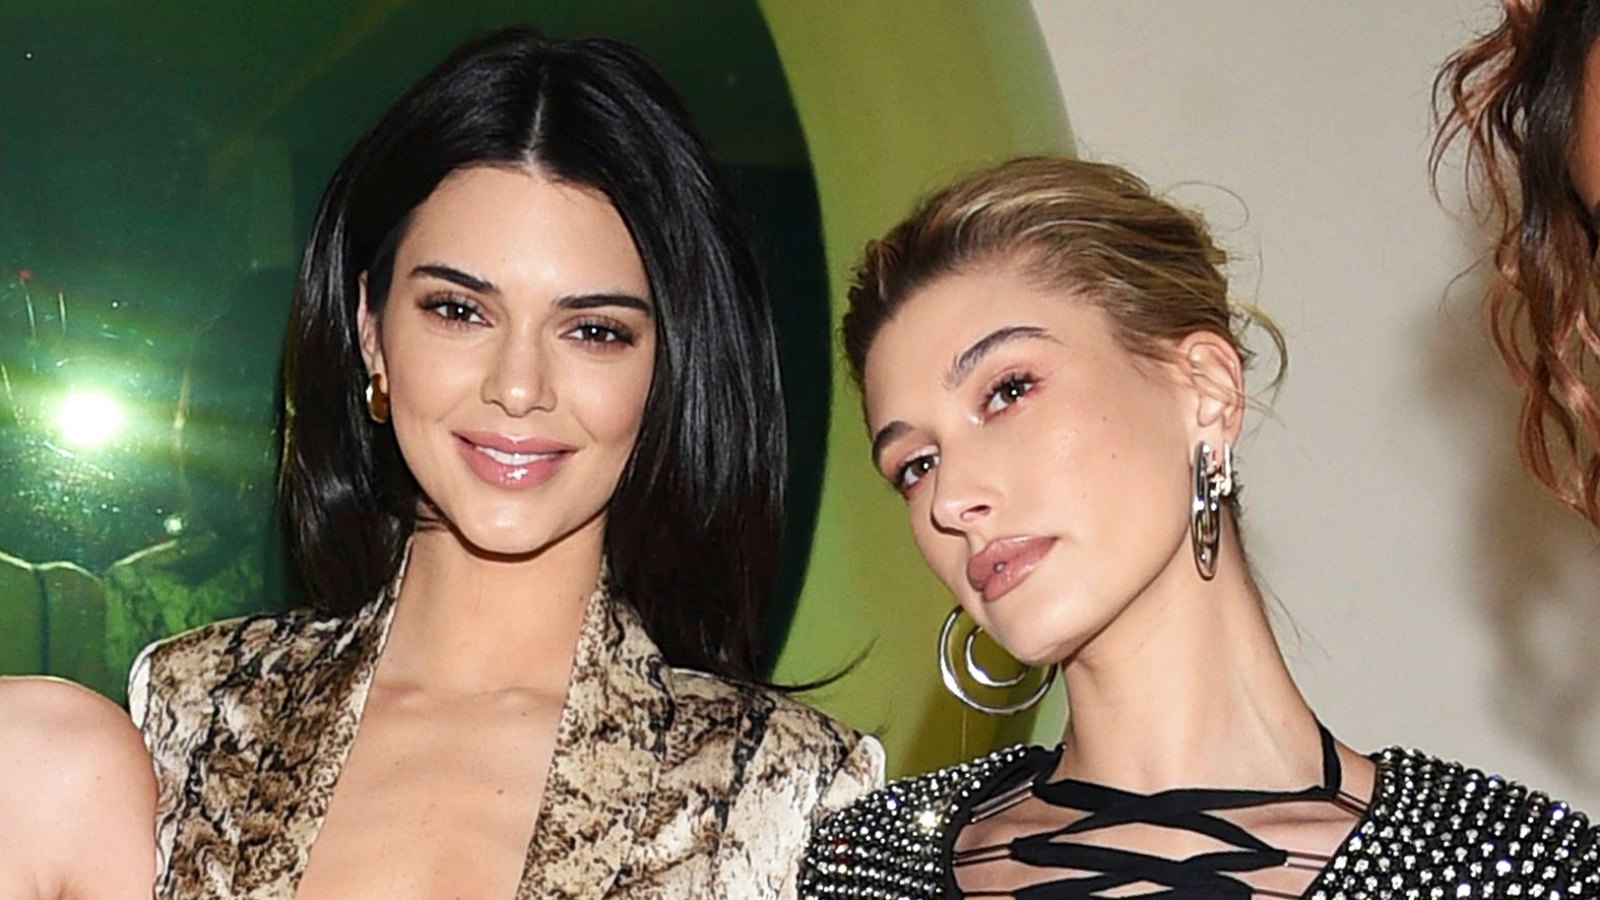 Hailey Baldwin & Kendall Jenner's Nike Sneakers Are at Nordstrom